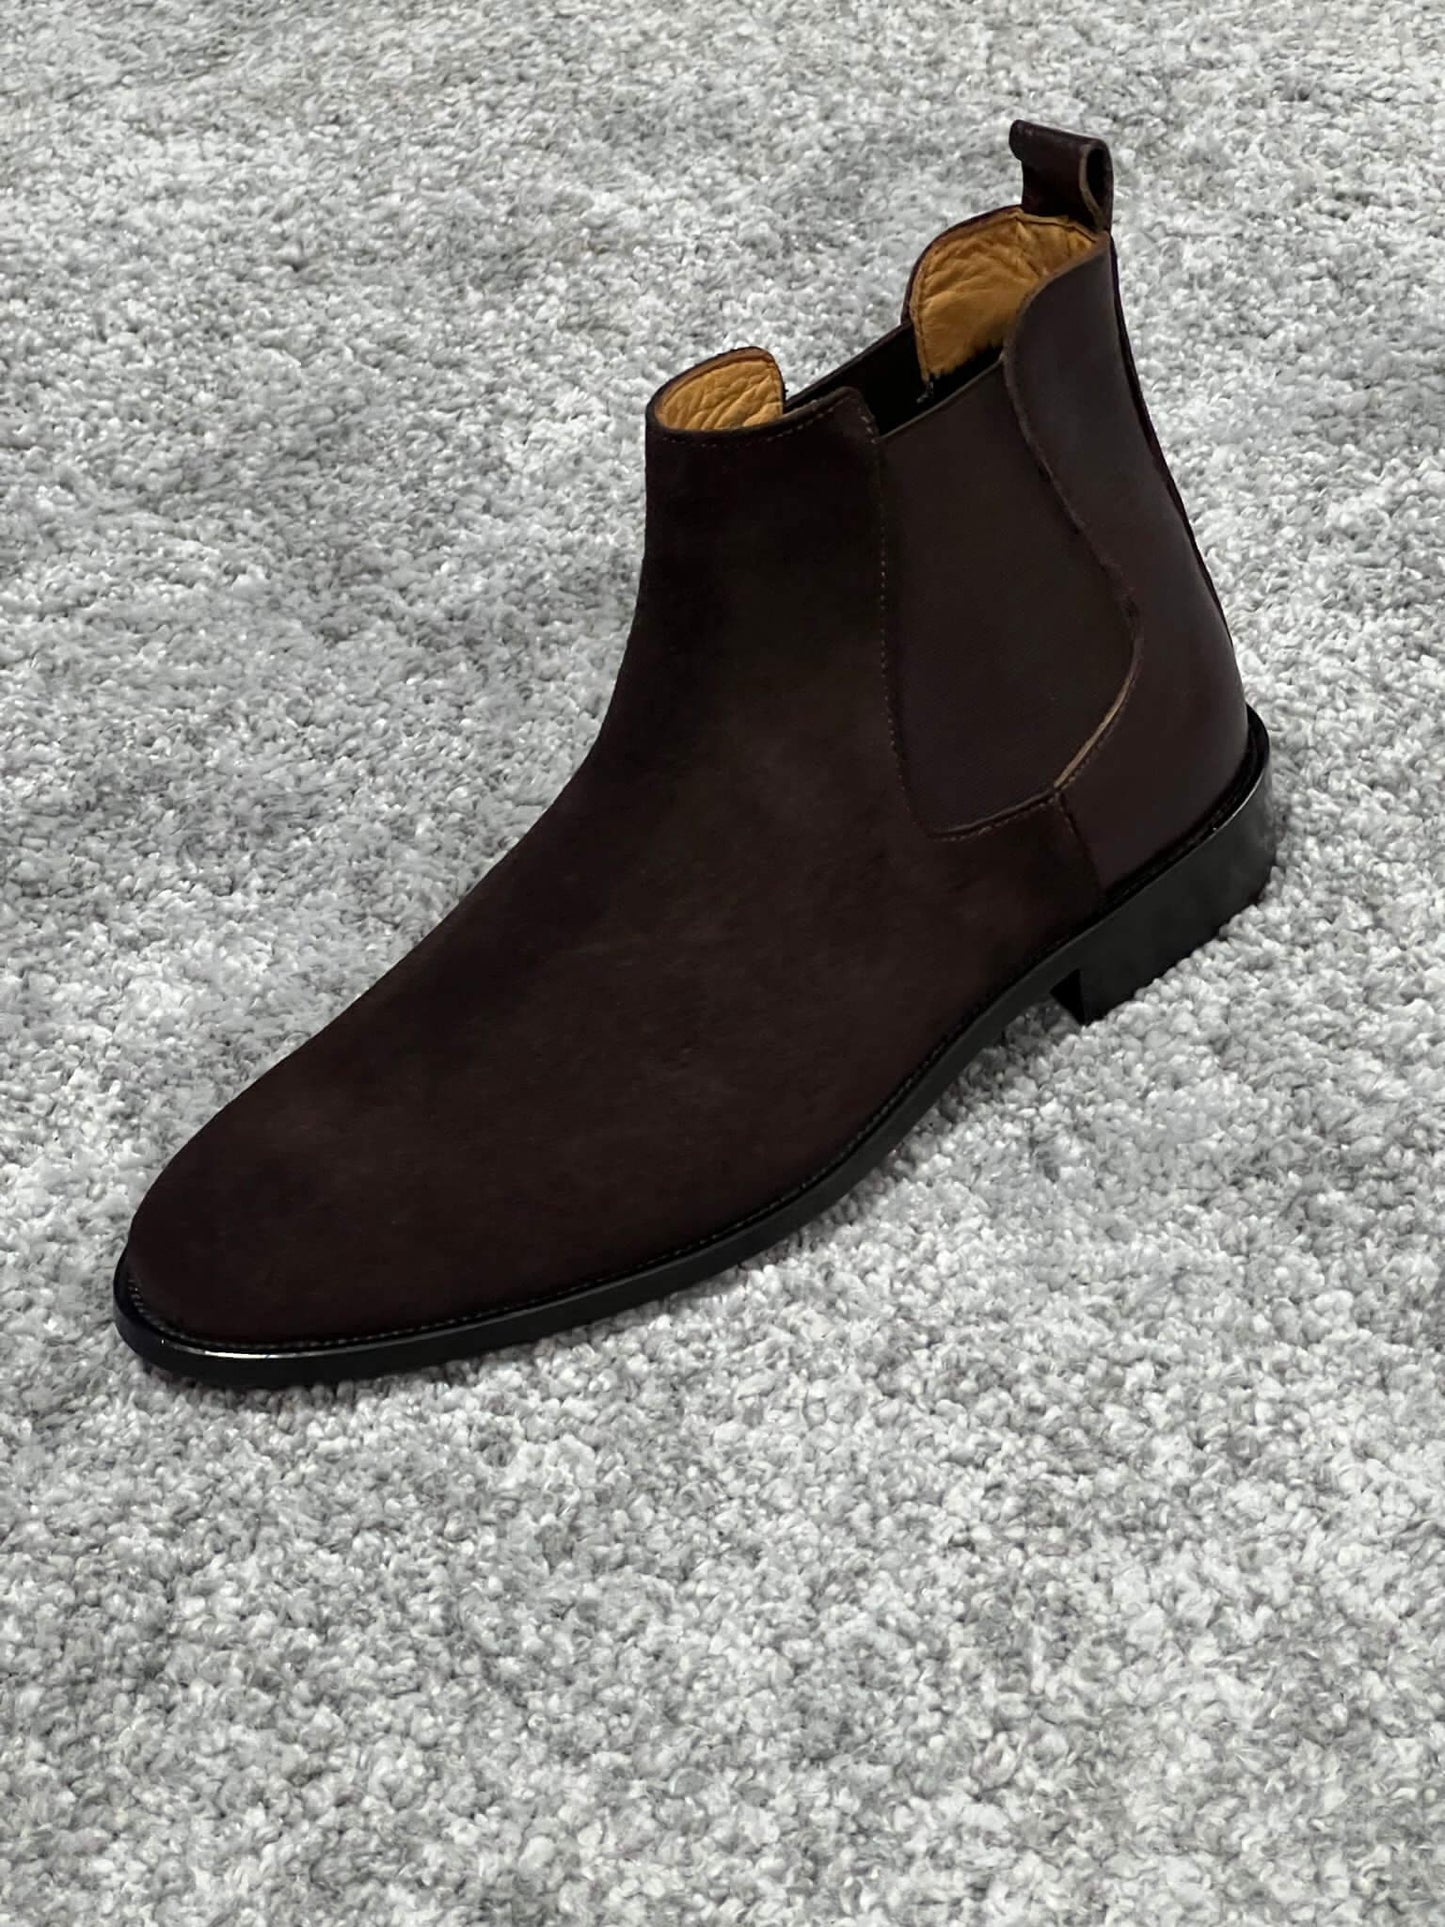 Suede Brown Chelsea Boots